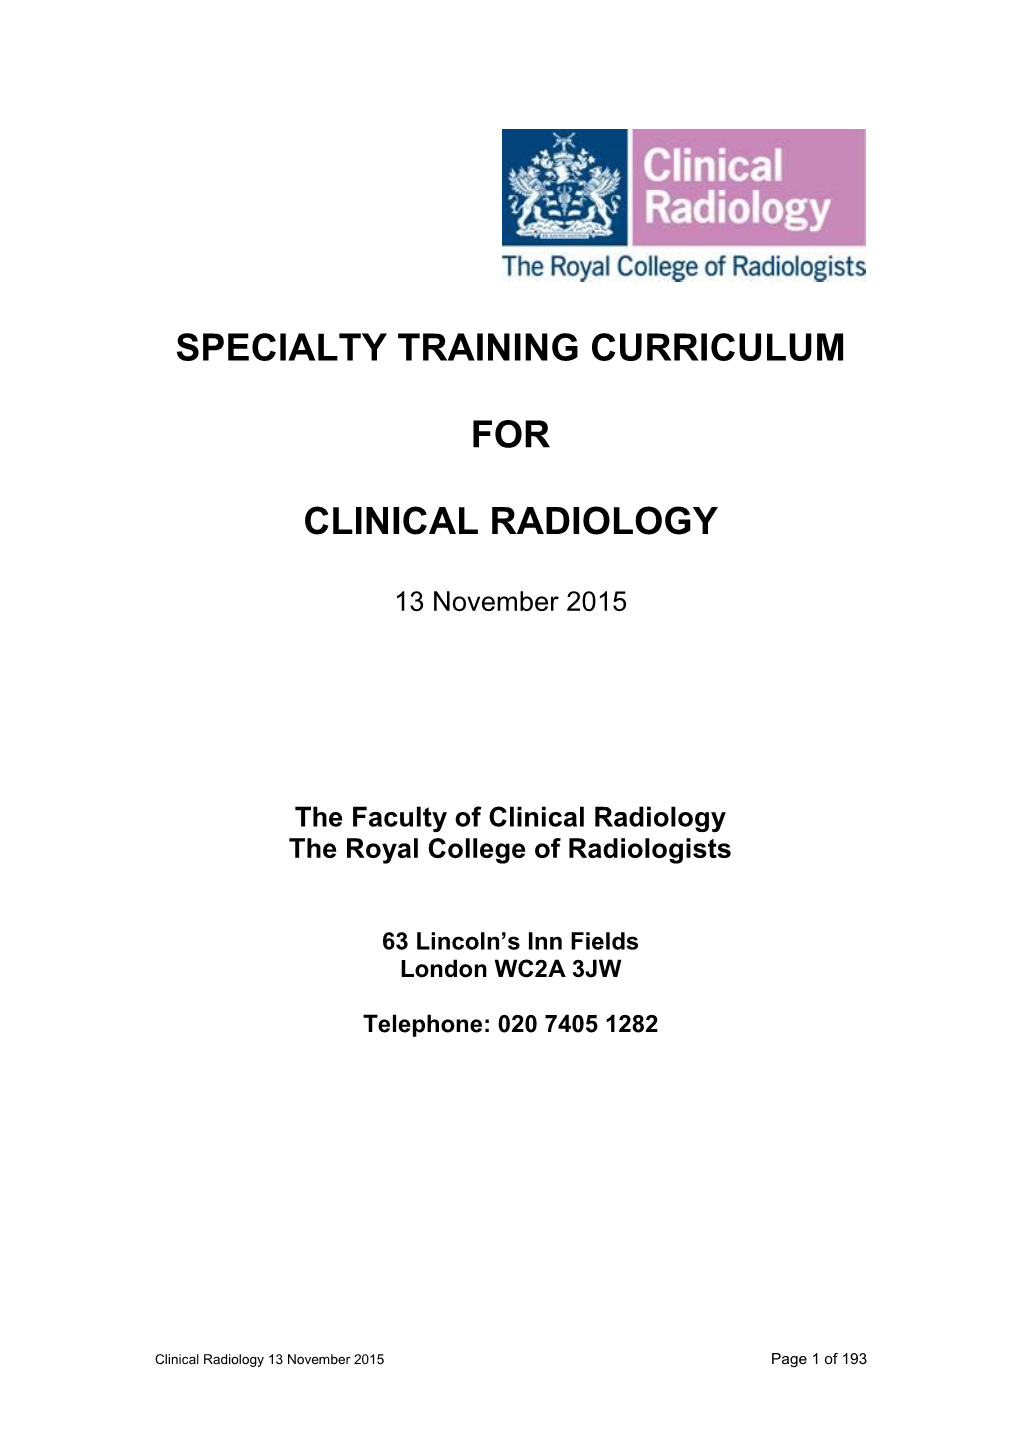 Specialty Training Curriculum for Clinical